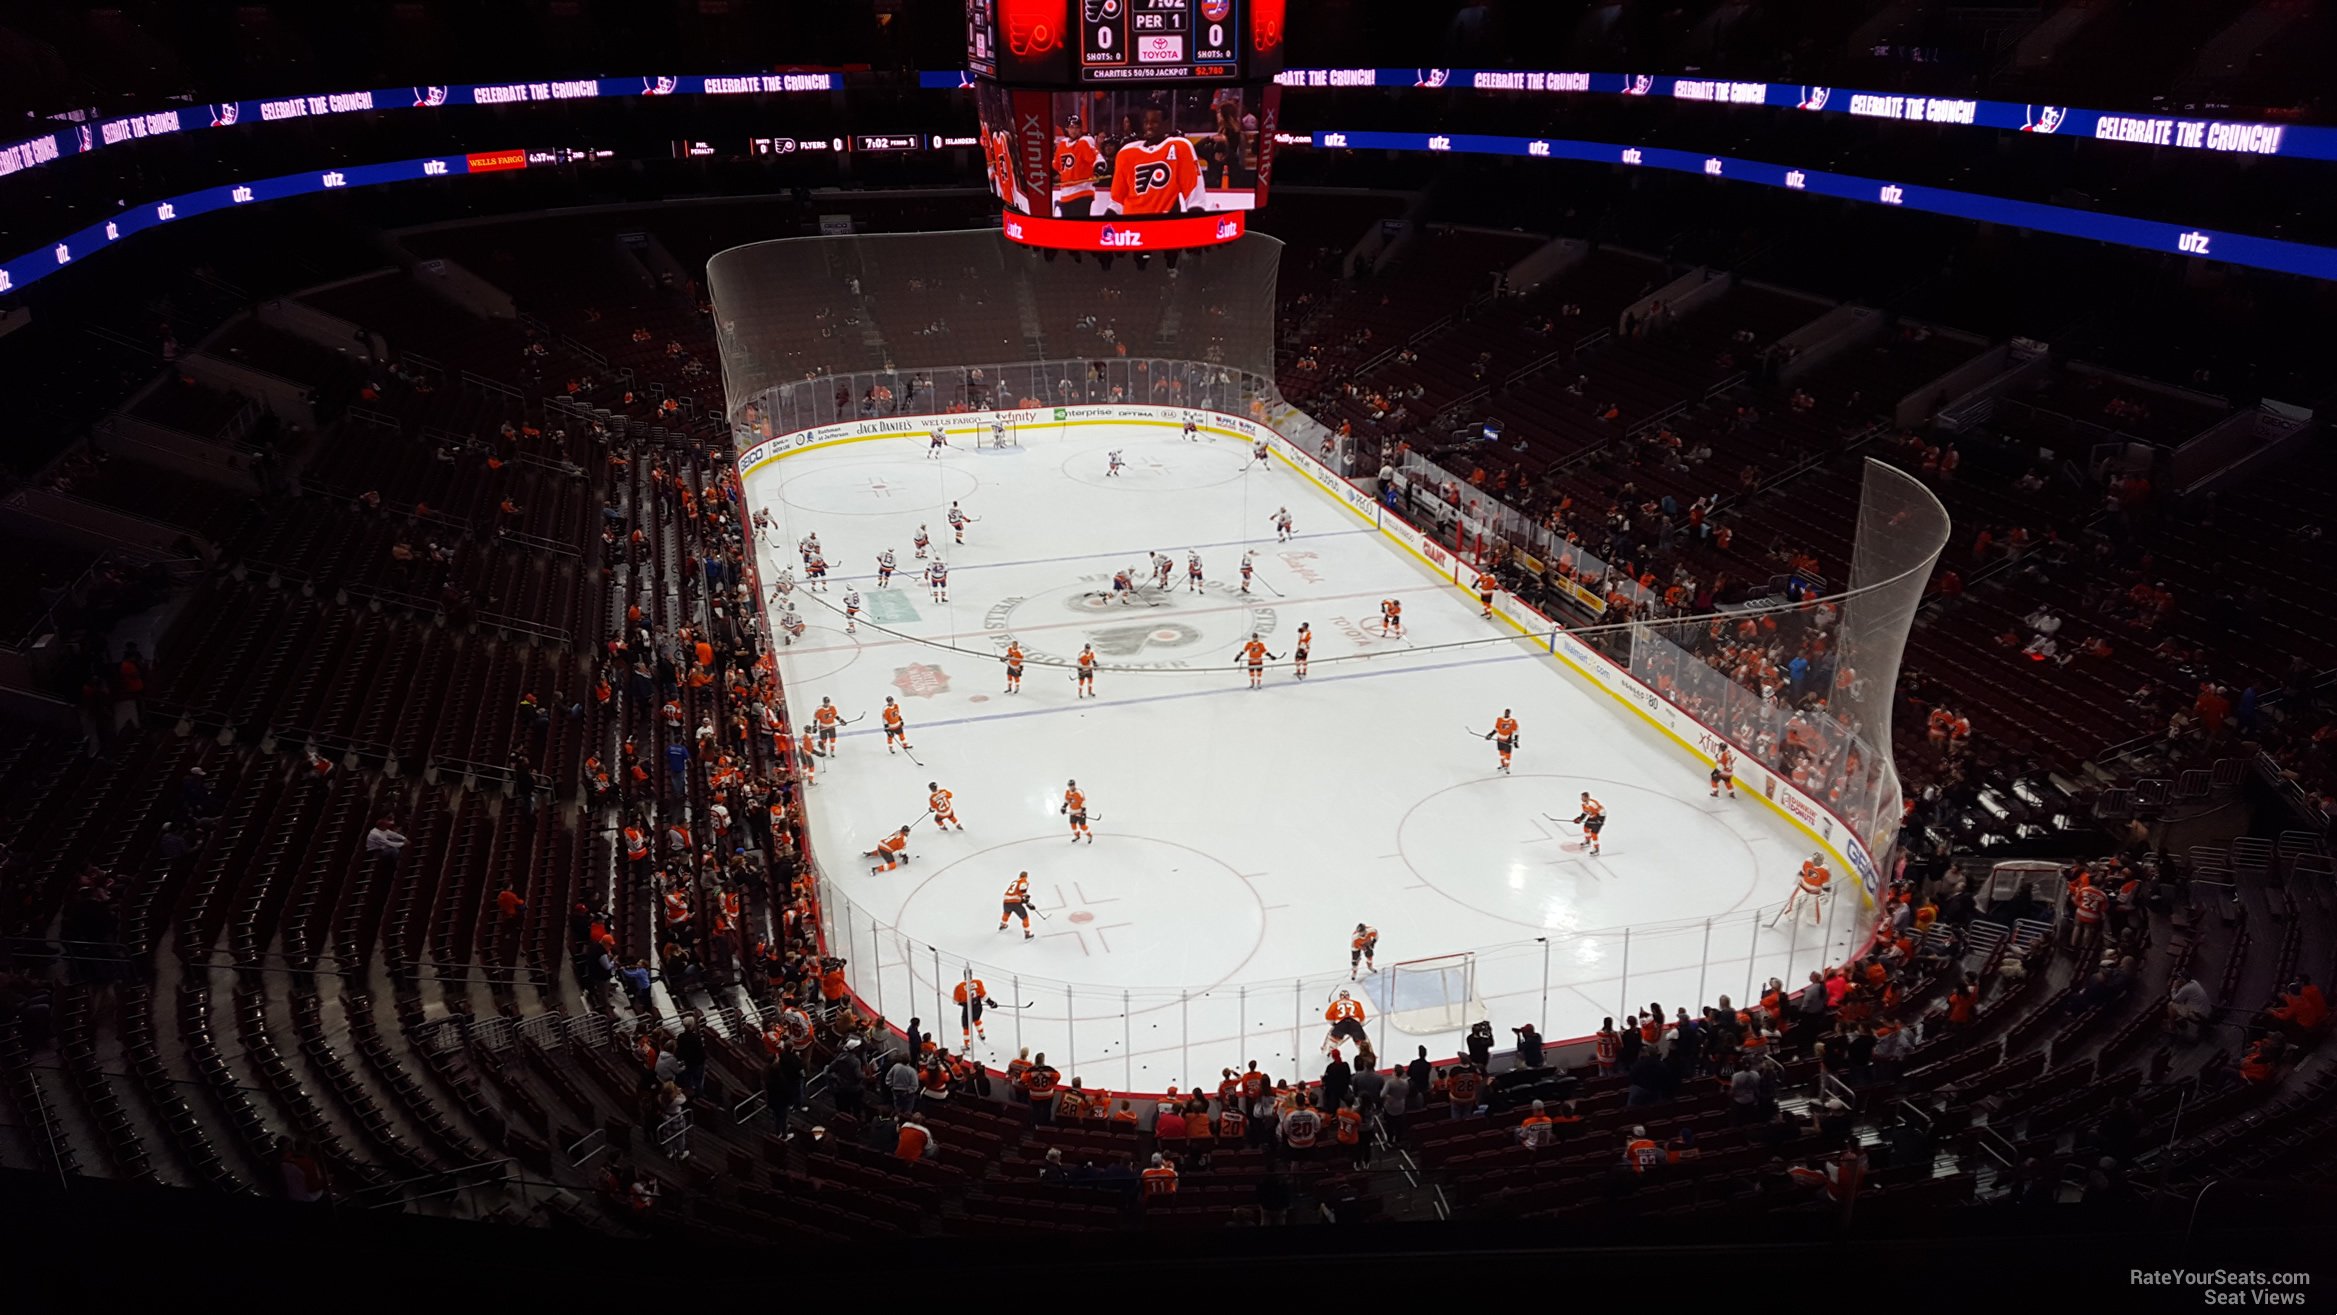 section 218, row 8 seat view  for hockey - wells fargo center